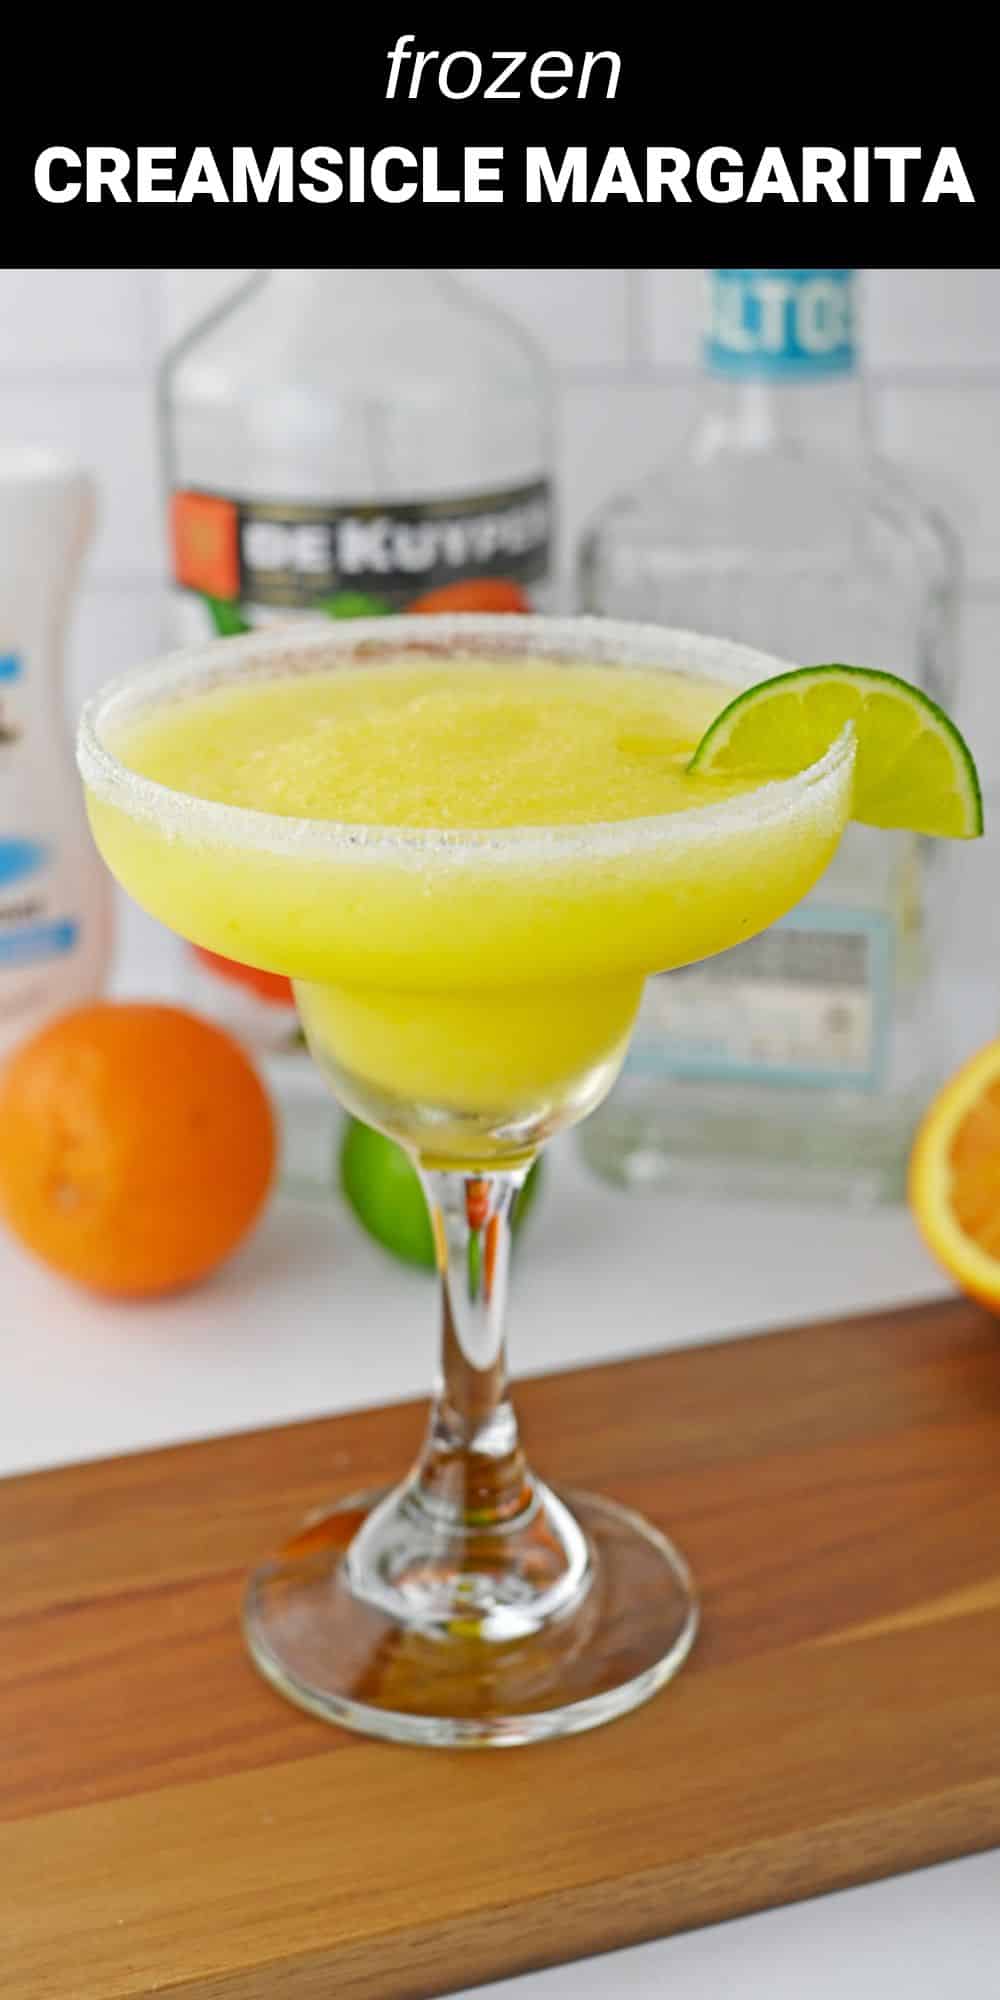 This creamsicle margarita is a rich and delicious frozen cocktail that’s bursting with creamy orange flavor. Part refreshing frozen drink and part decadent dessert, this simple recipe is sure to be a big hit at your next party or patio happy hour.